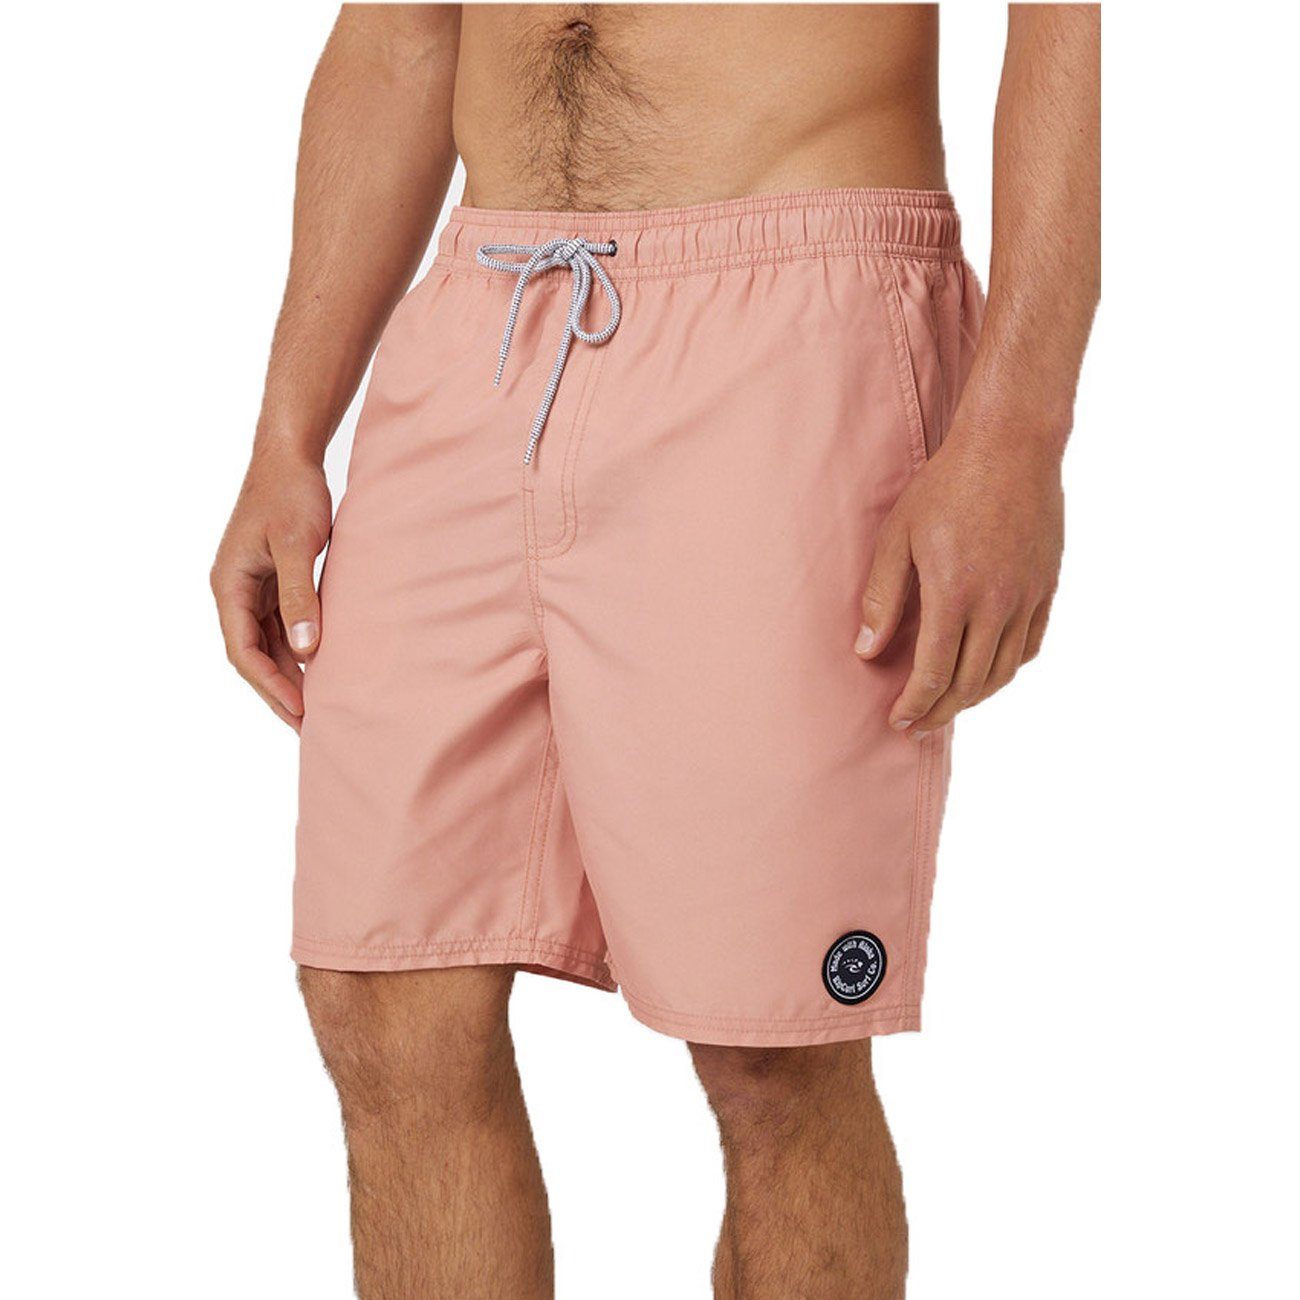 Rip Curl Badeshorts EASY LIVING VOLLEY dusty rose